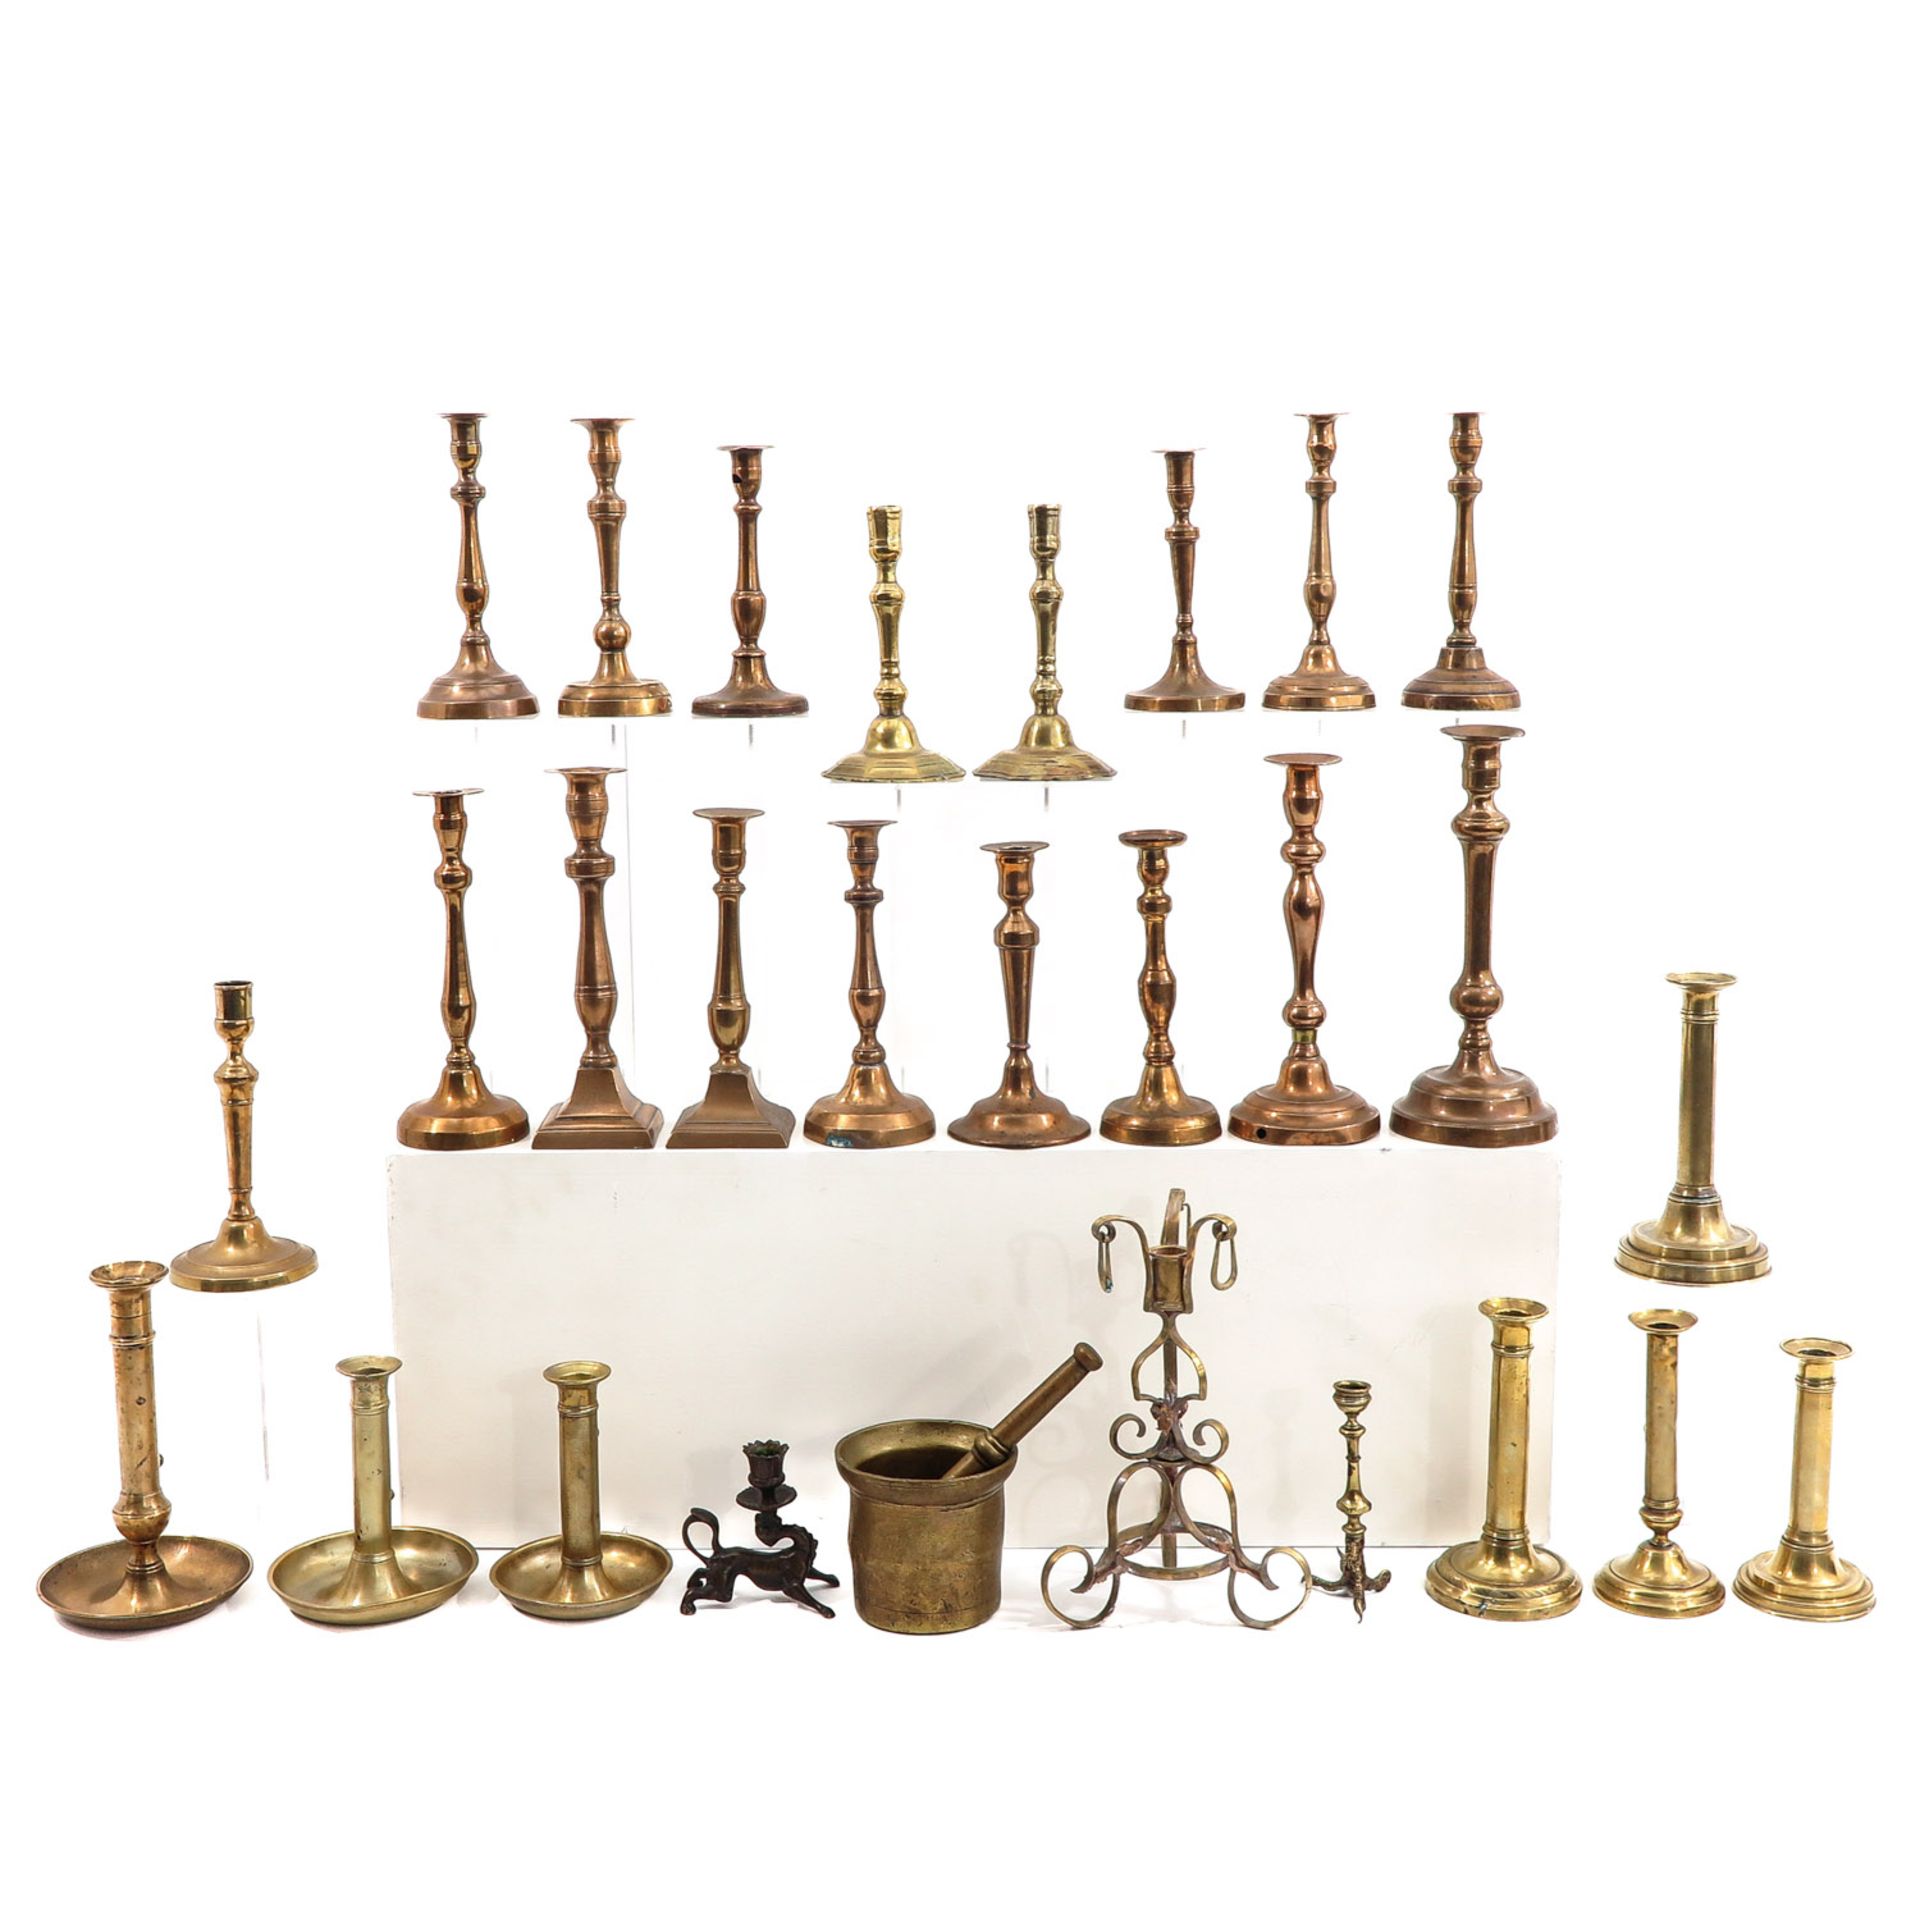 A Collection of 27 Candlesticks and 1 Mortar - Image 3 of 10